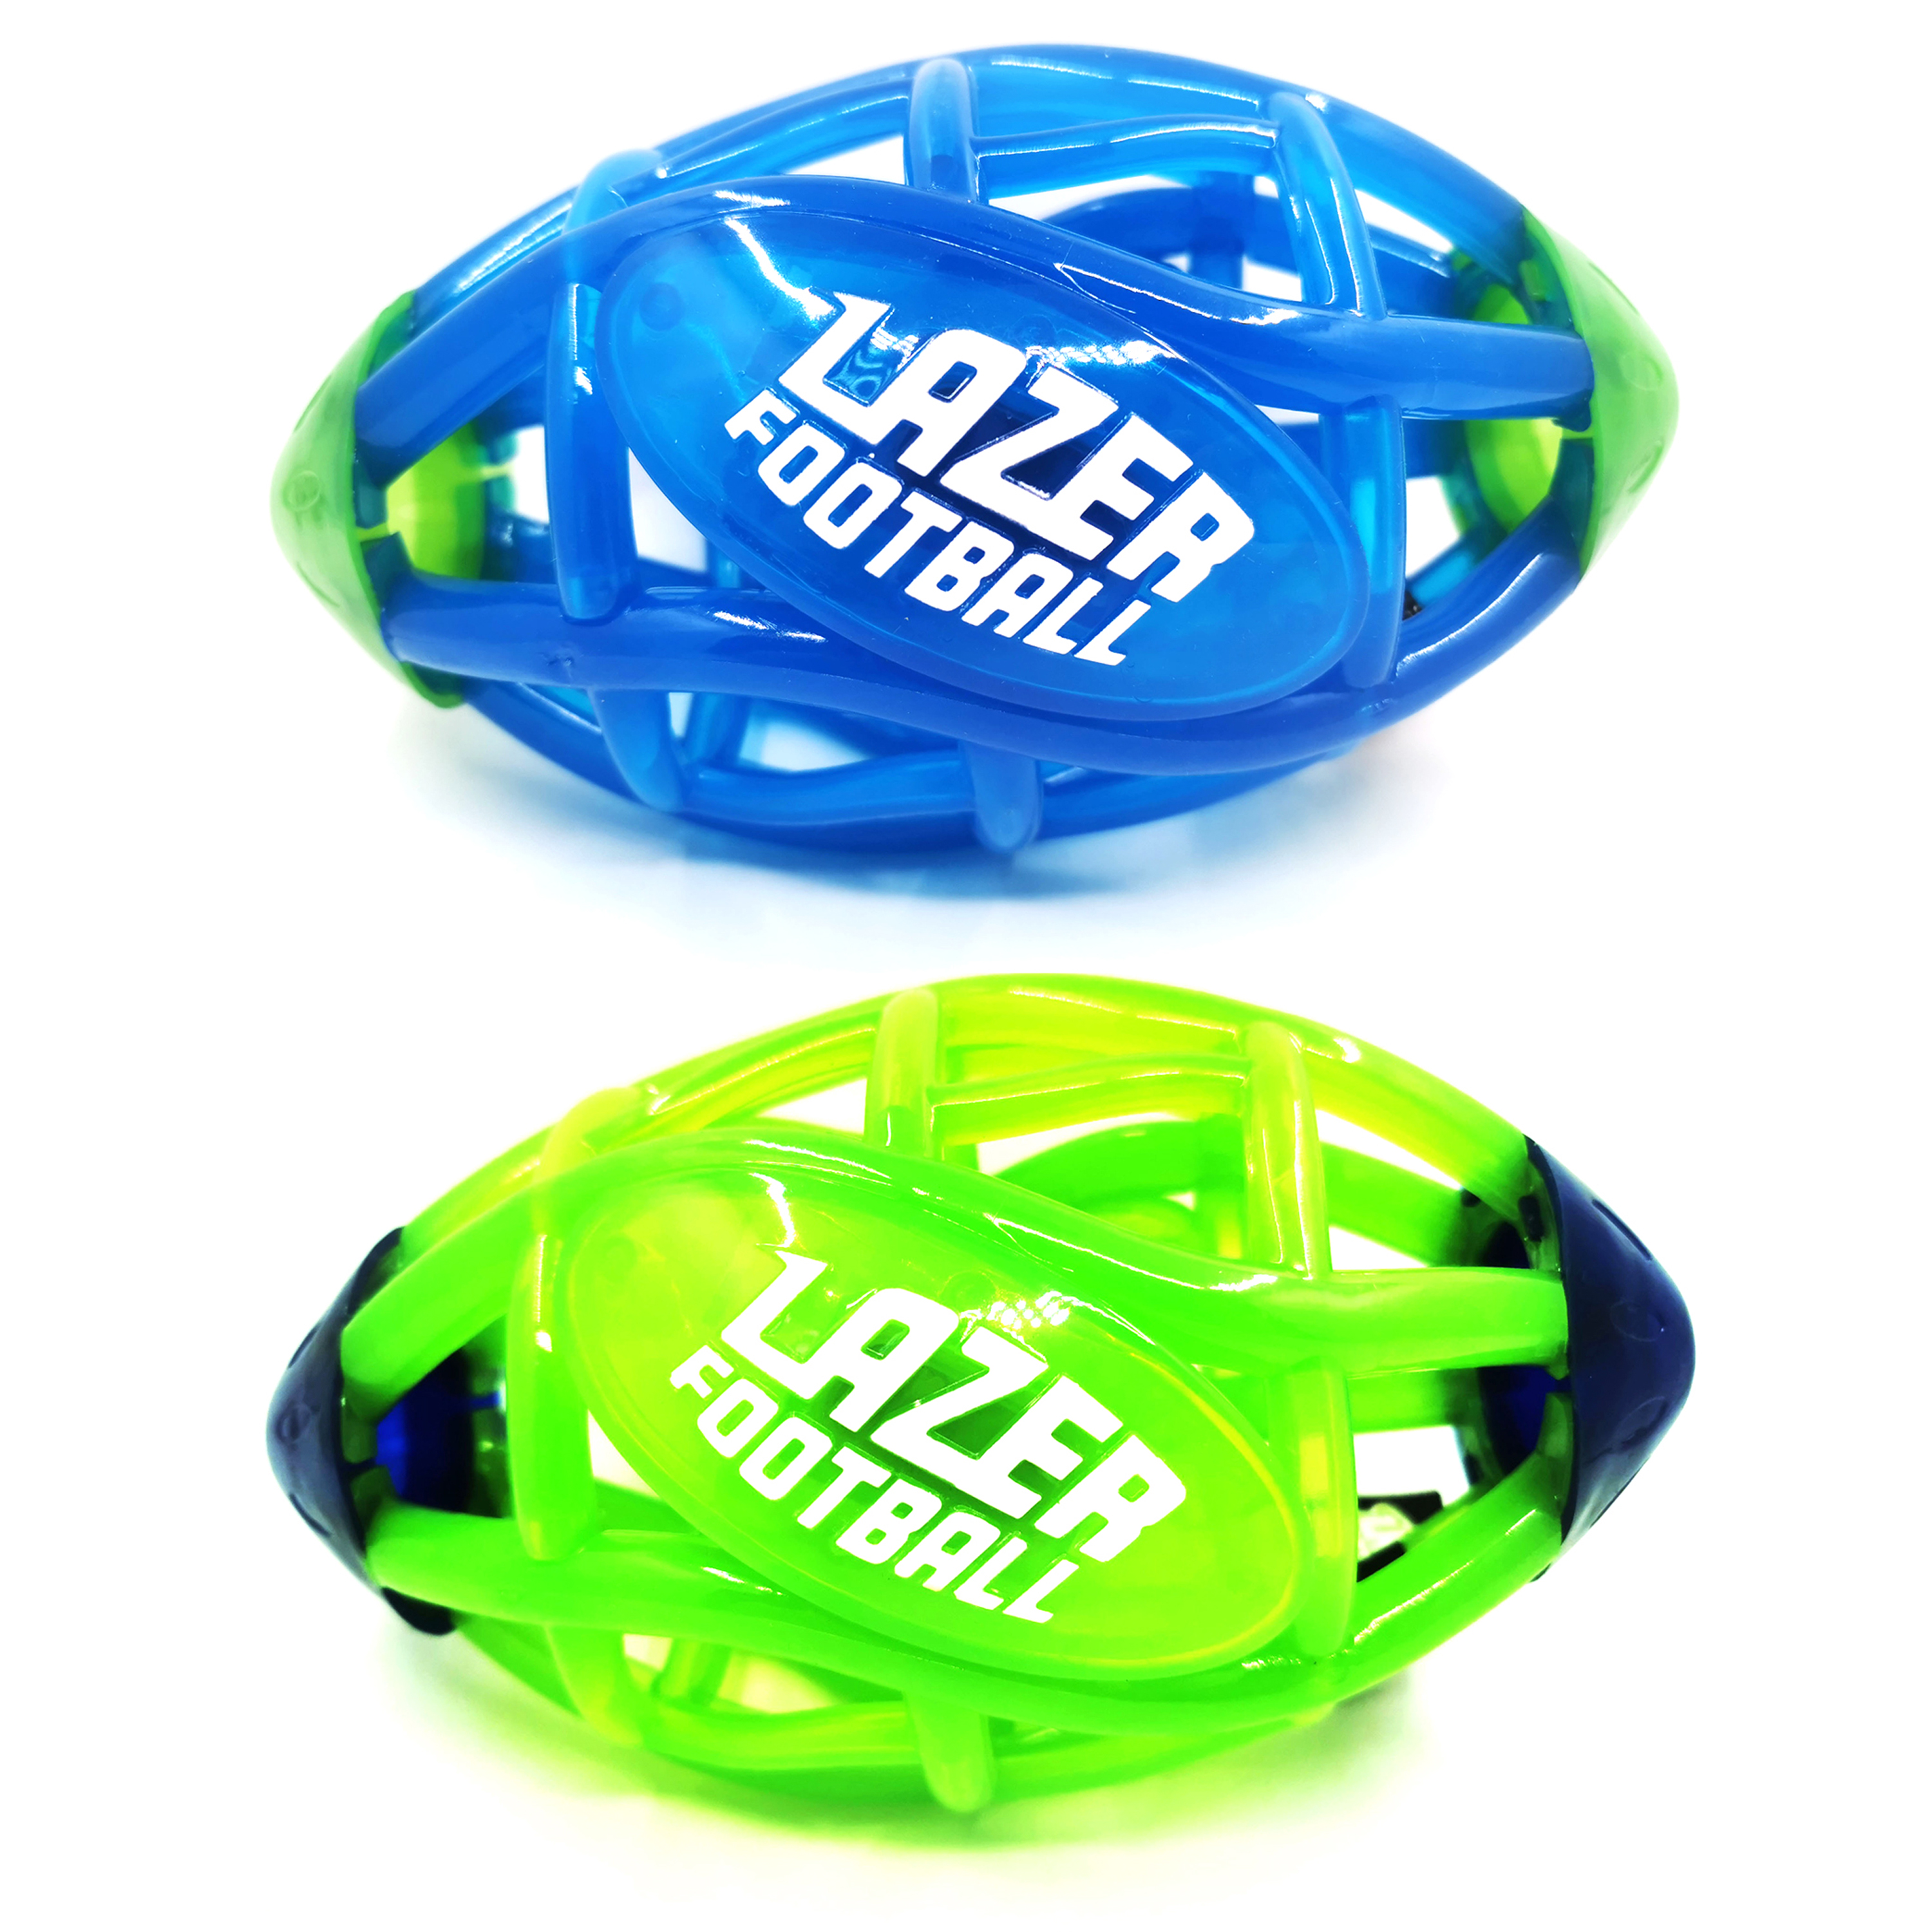 Lazer Light Up Glow Rubber Toy Football, Green and Blue, Pee Wee Size 3 - image 1 of 5